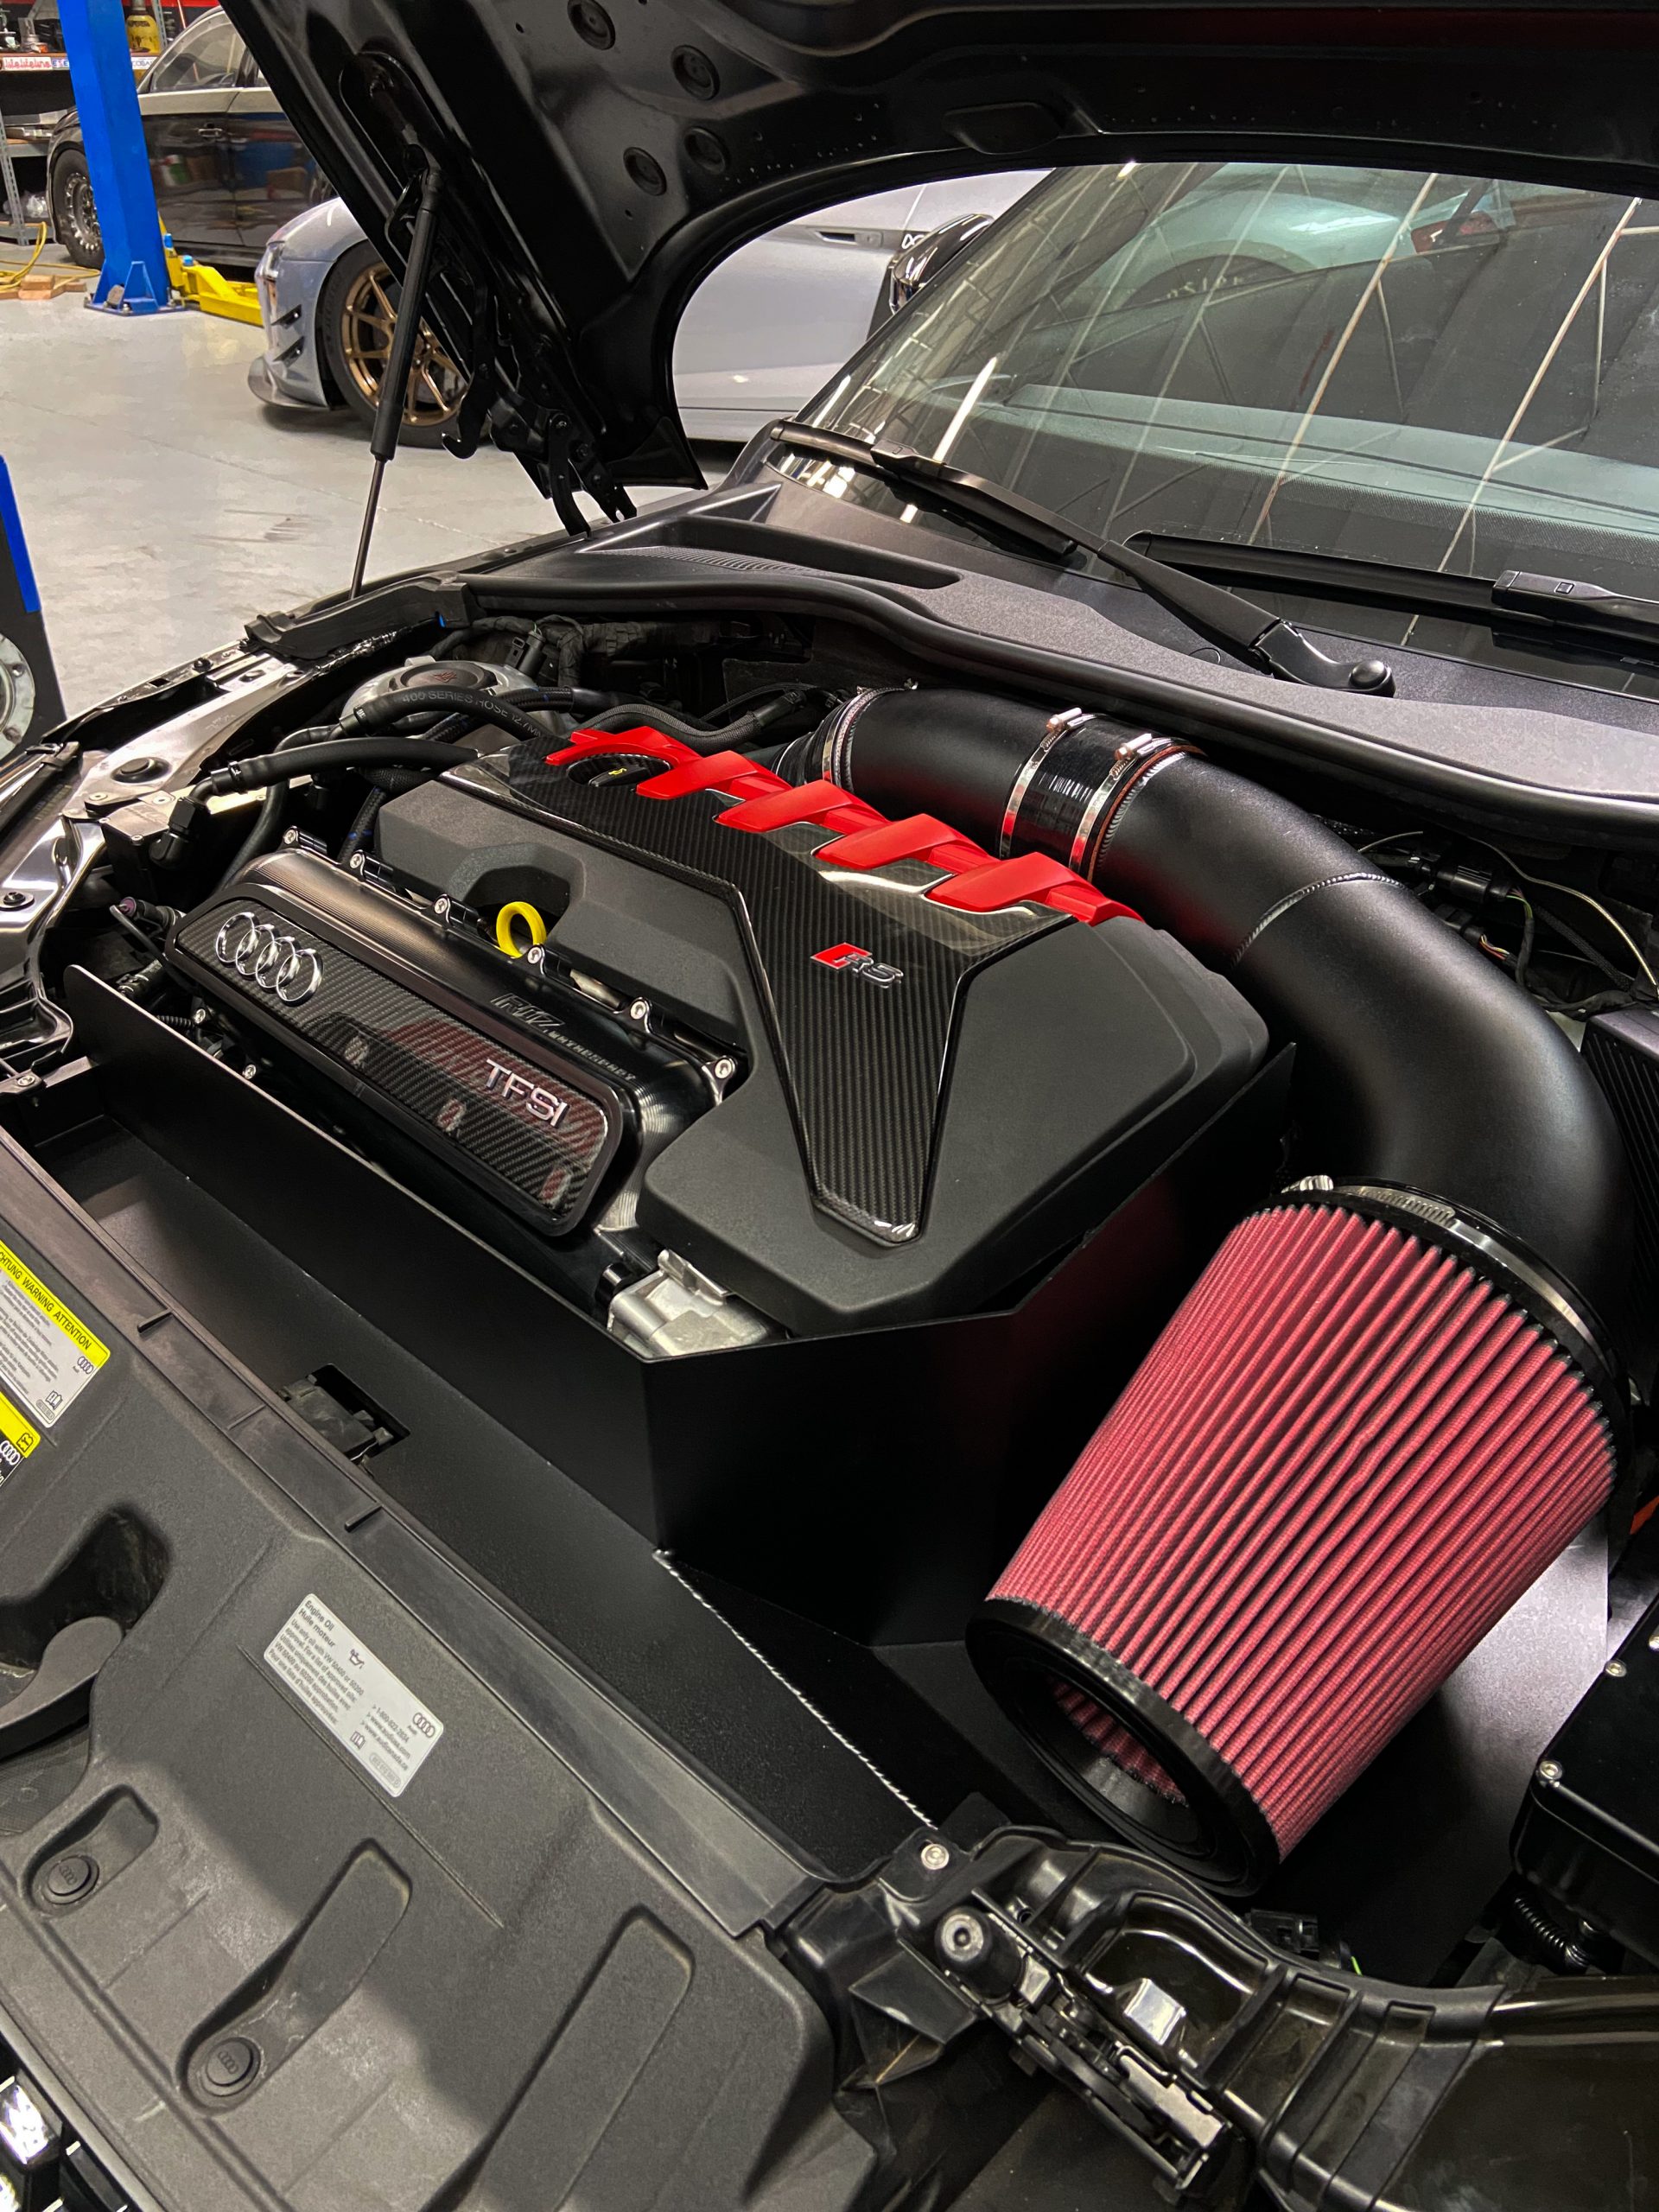 IMS RS3/TTRS 5" High Flow Intake